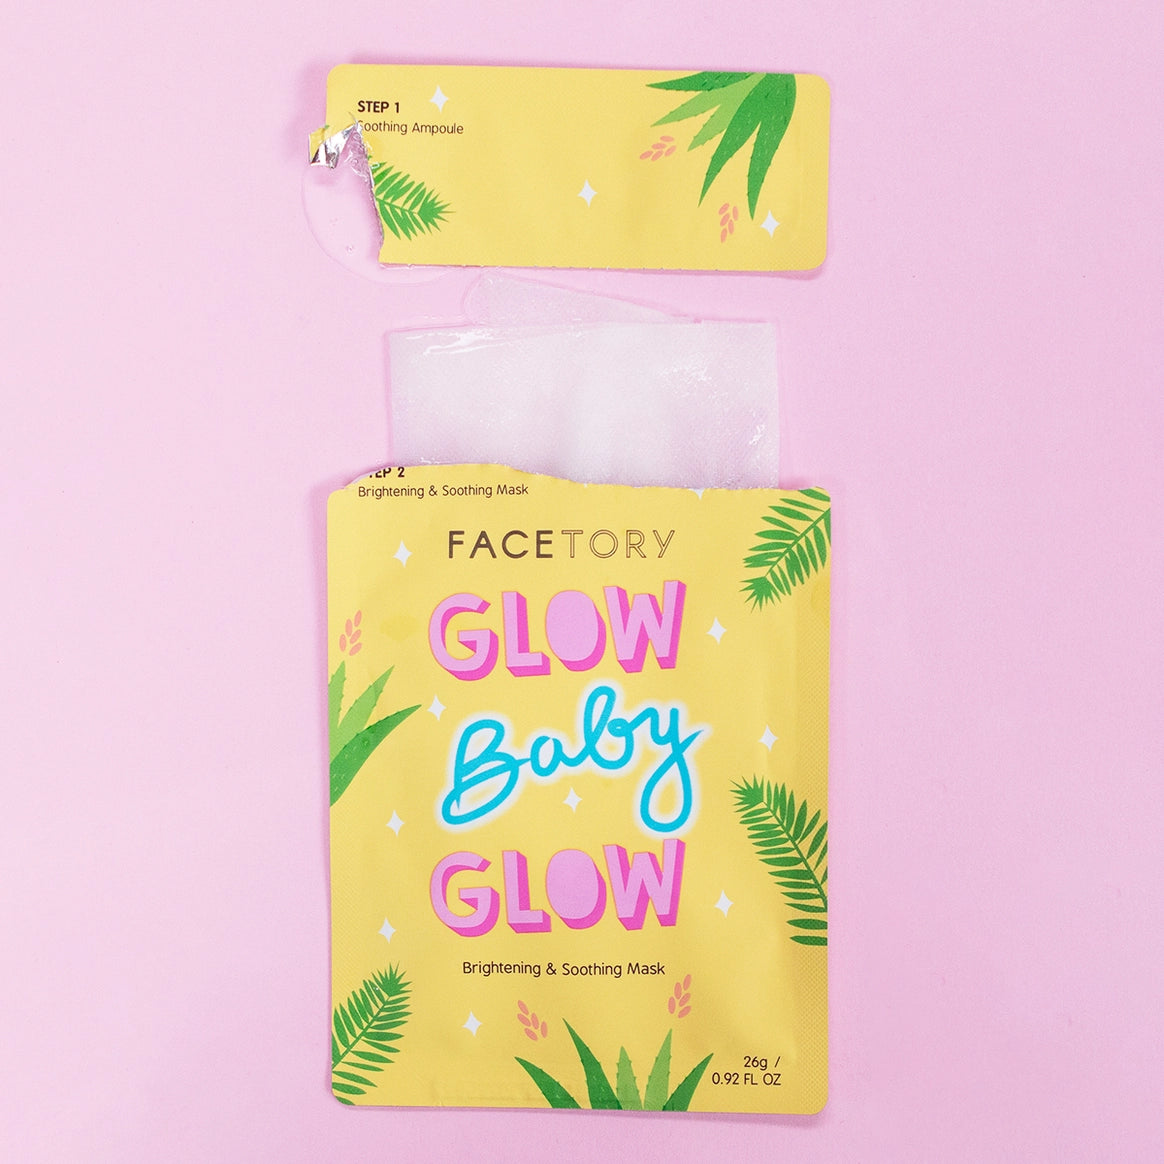 Glow Baby Glow - Brightening and Soothing Mask - P I C N I C 